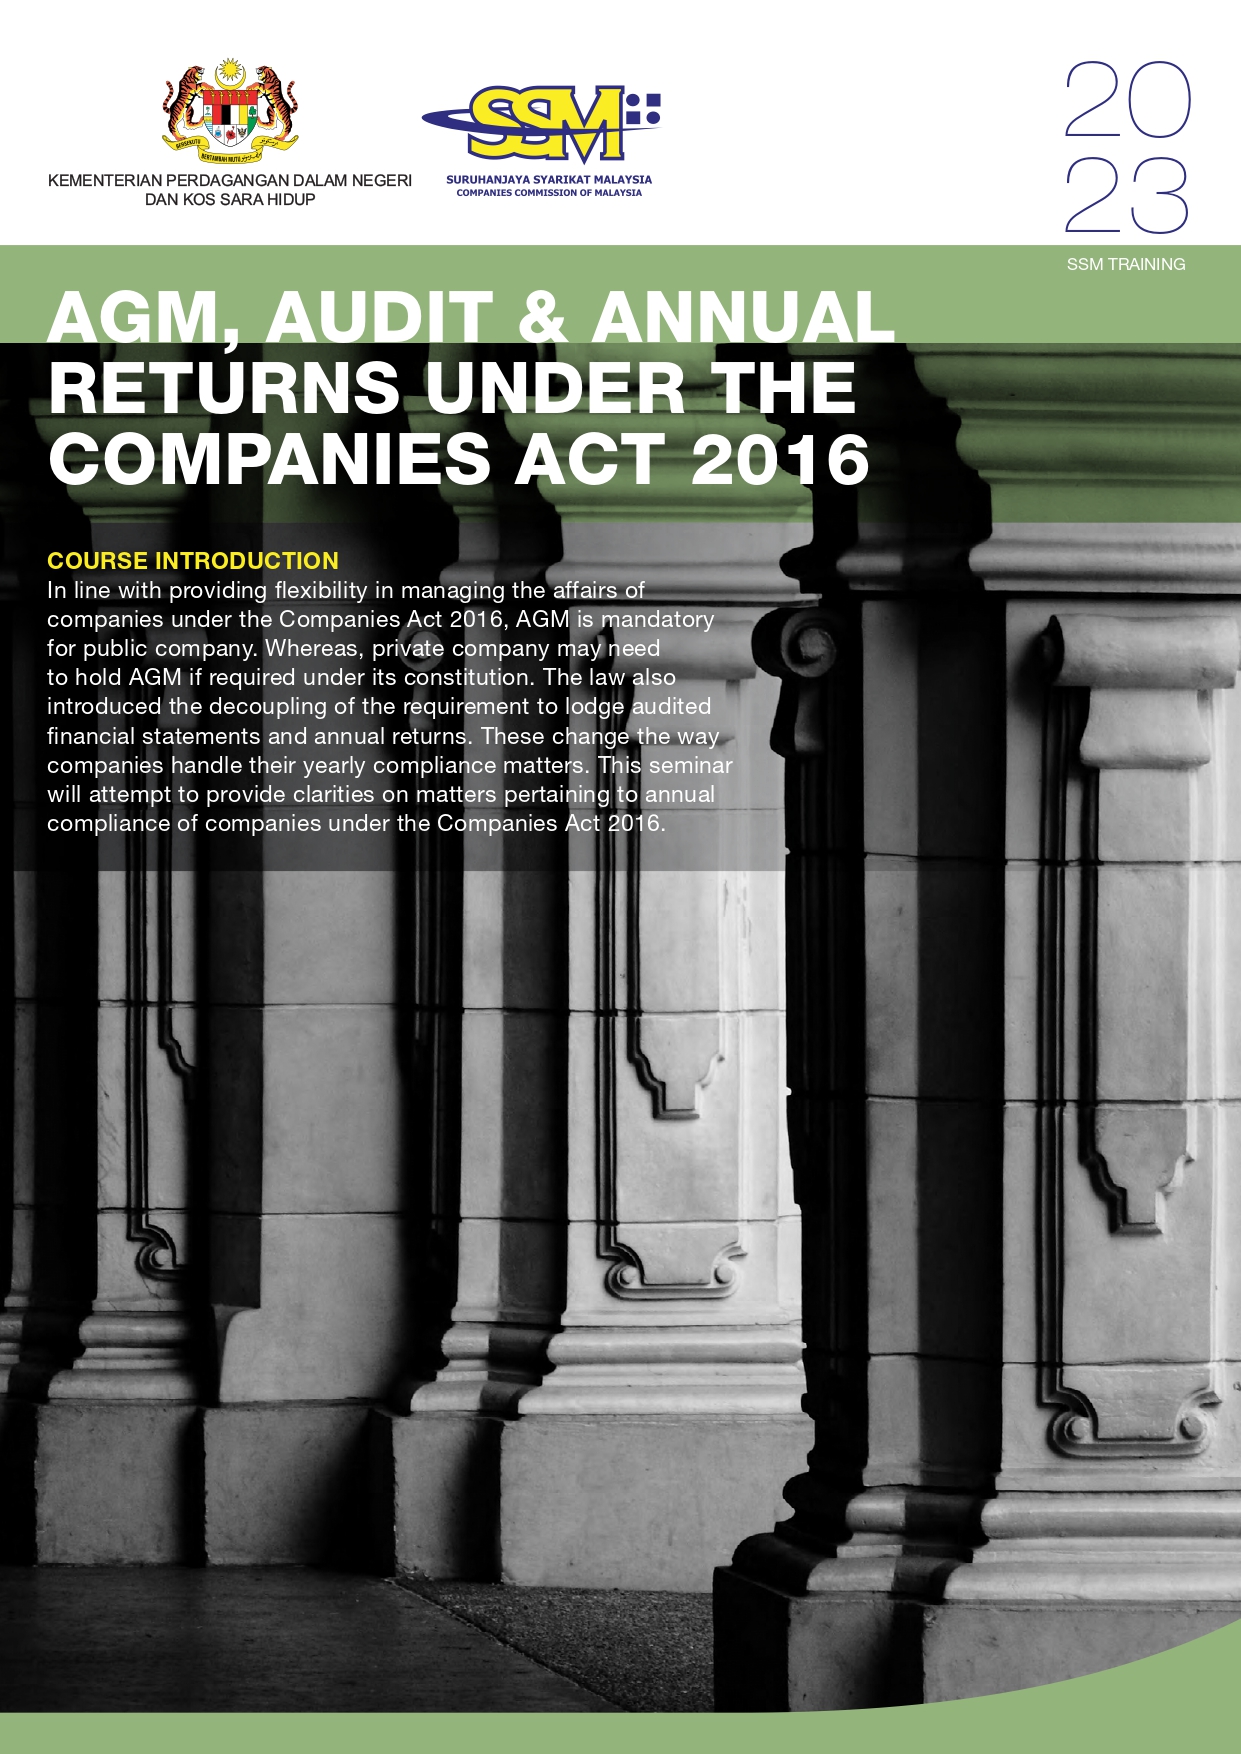 AGM, AUDIT & ANNUAL RETURNS UNDER THE COMPANIES ACT 2016_page-0001.jpg